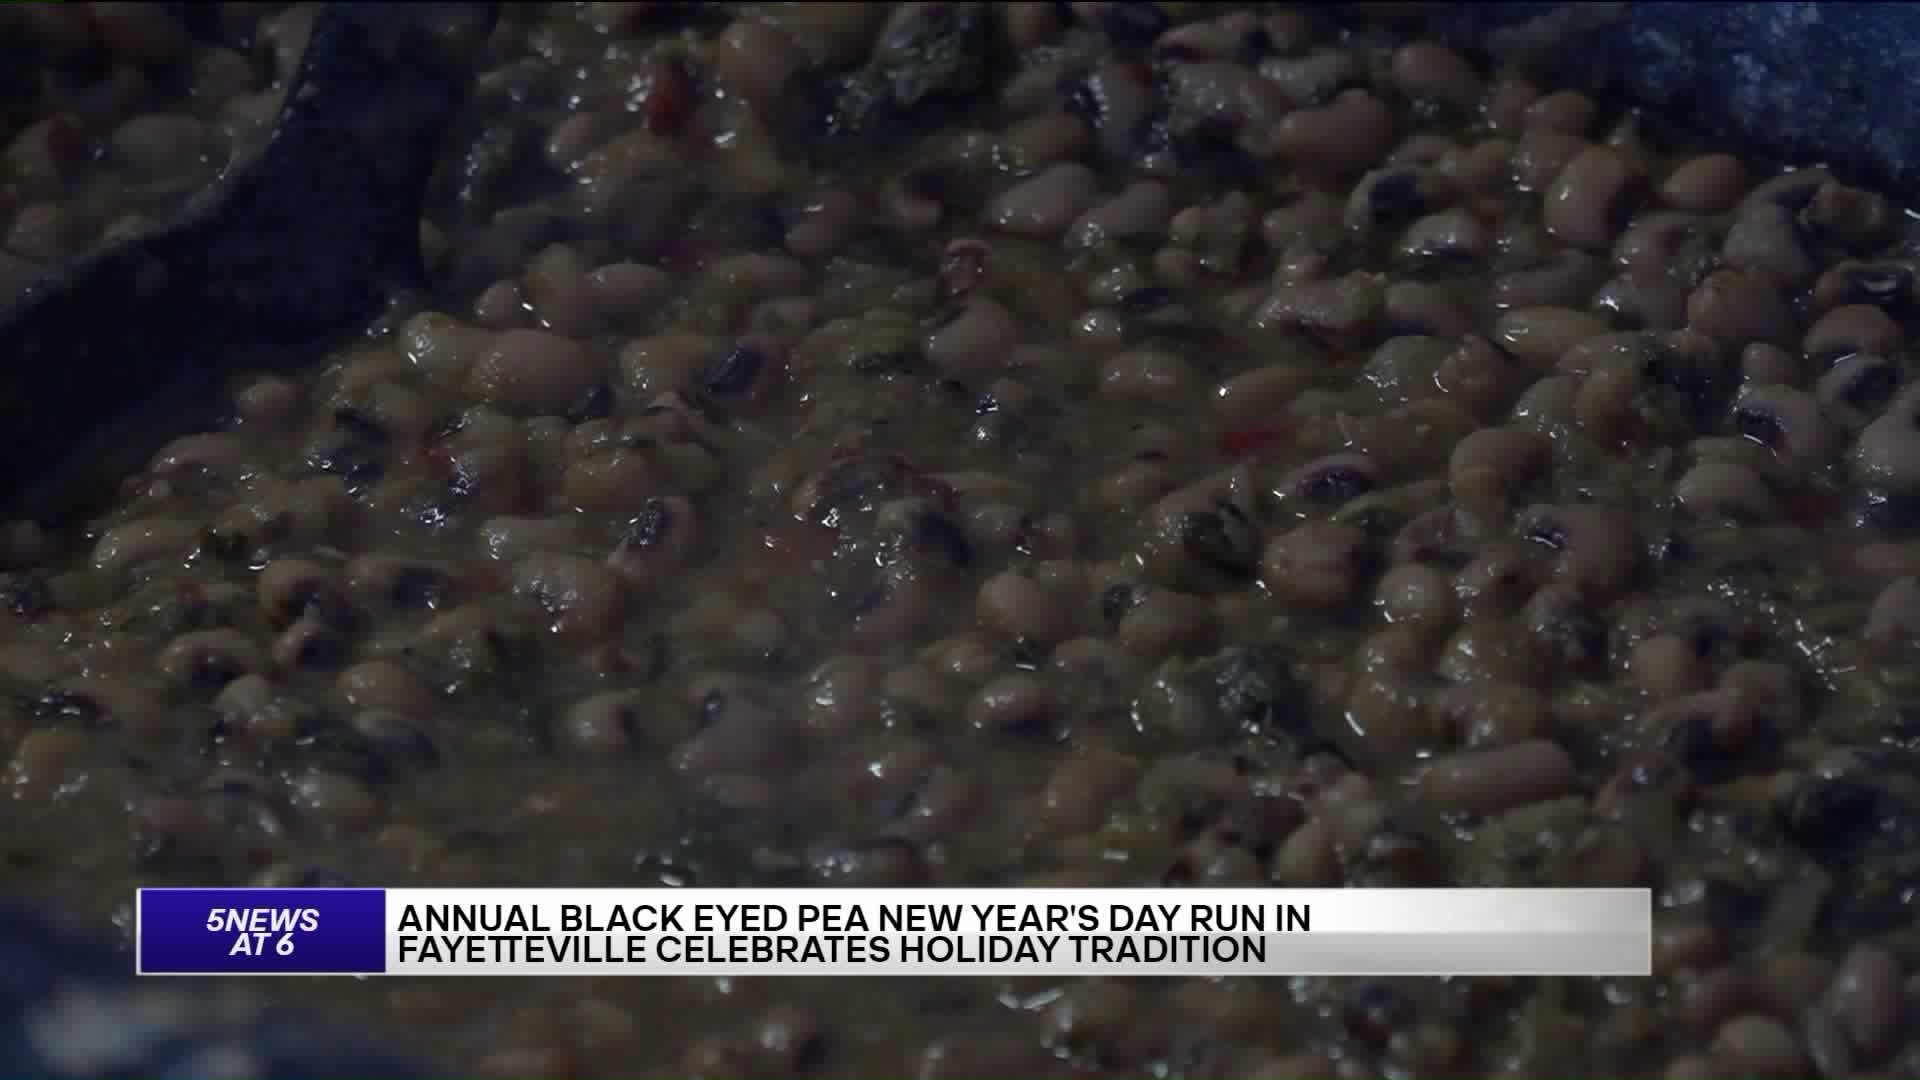 Runners Celebrate The New Year With A Race And Black Eyed Peas